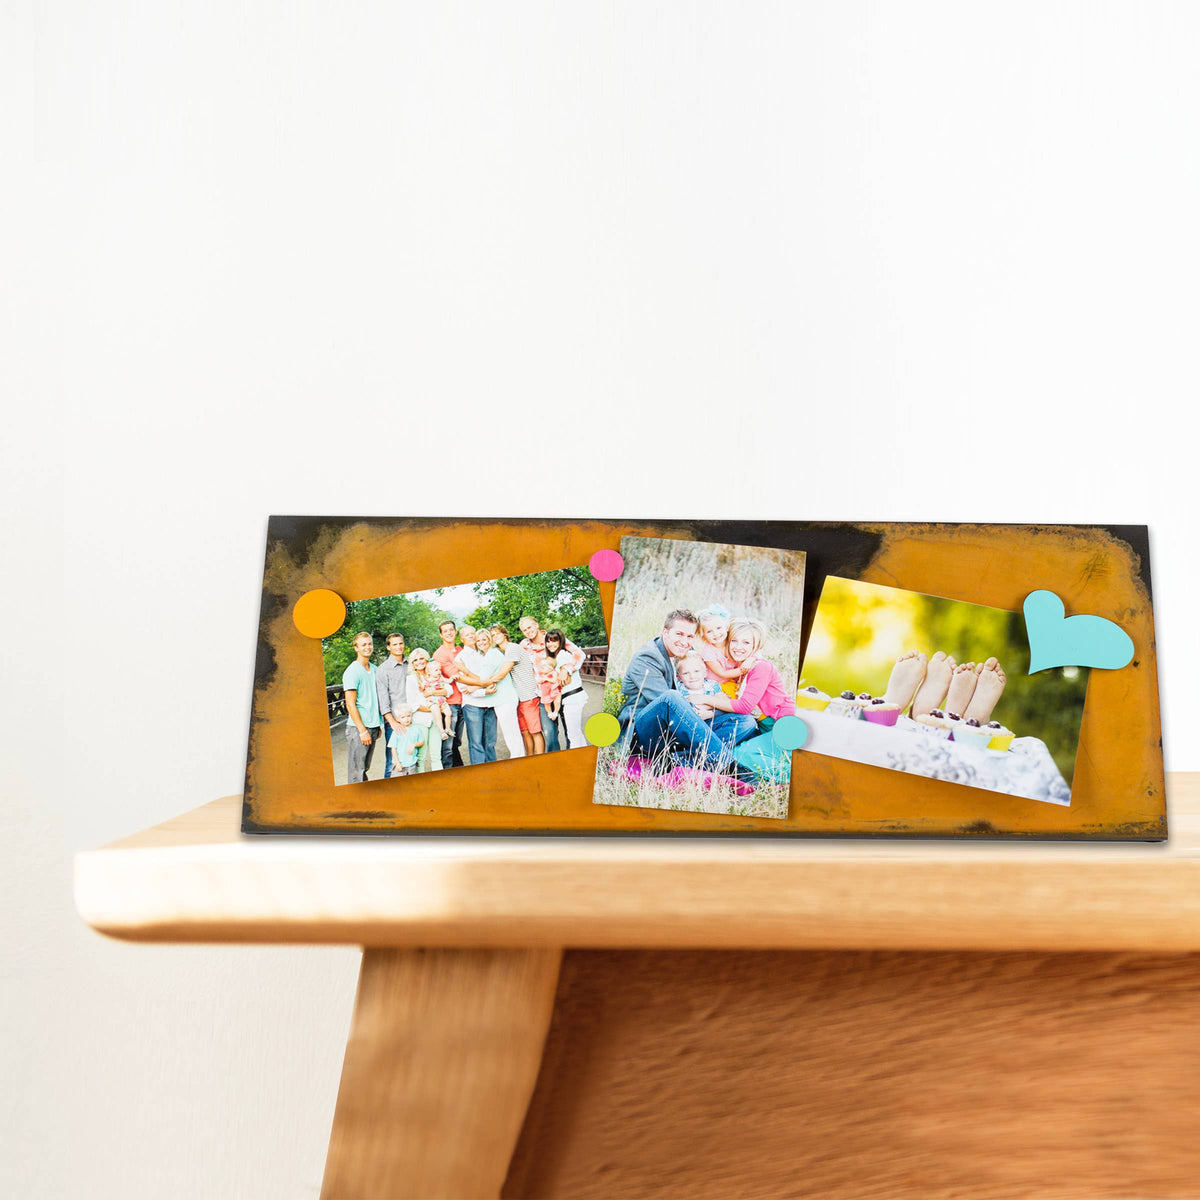 One of our best sellers! This magnetic picture frame is the perfect way to organize your multiple photos or notes.